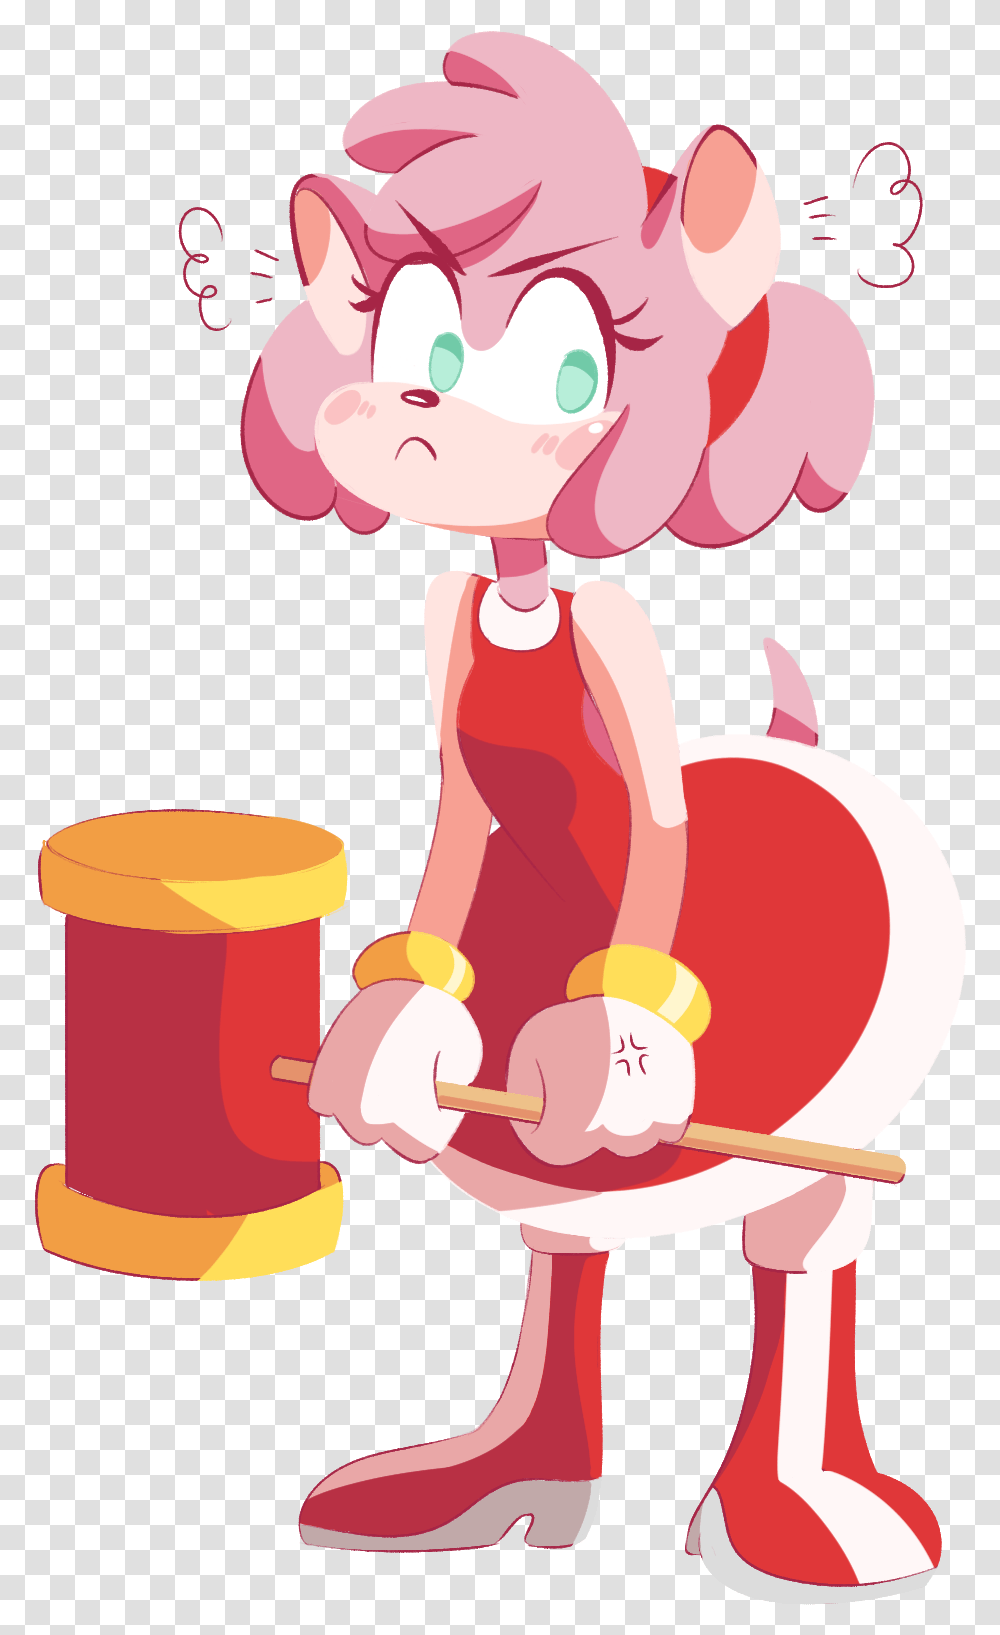 Download Hd Amy Rose Is Here Amy Rose Aesthetic Amy Rose Pastel Fanart, Arm, Life Buoy, Stomach, Face Transparent Png